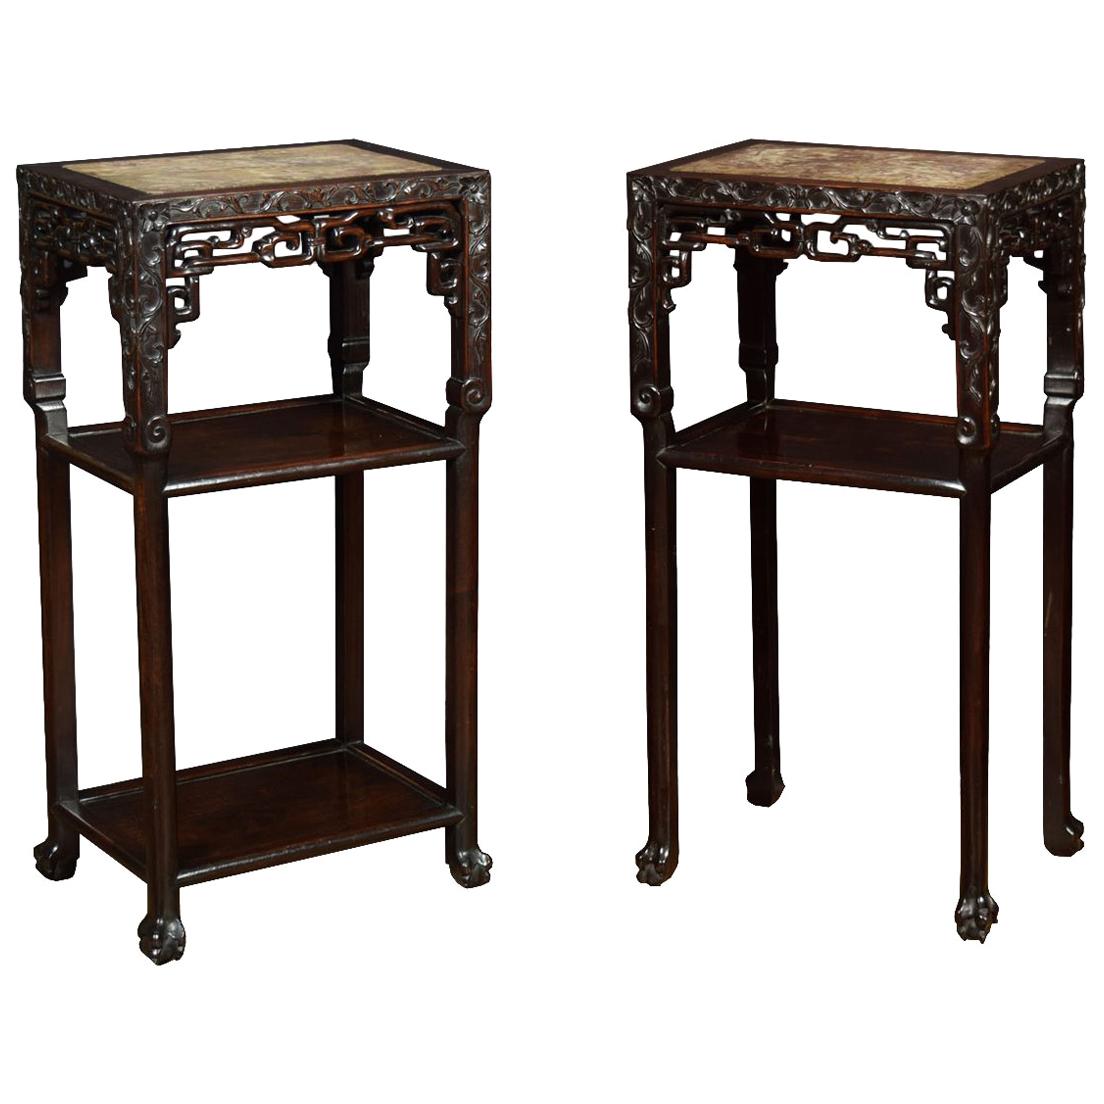 Pair of Chinese Rosewood and Marble Tables